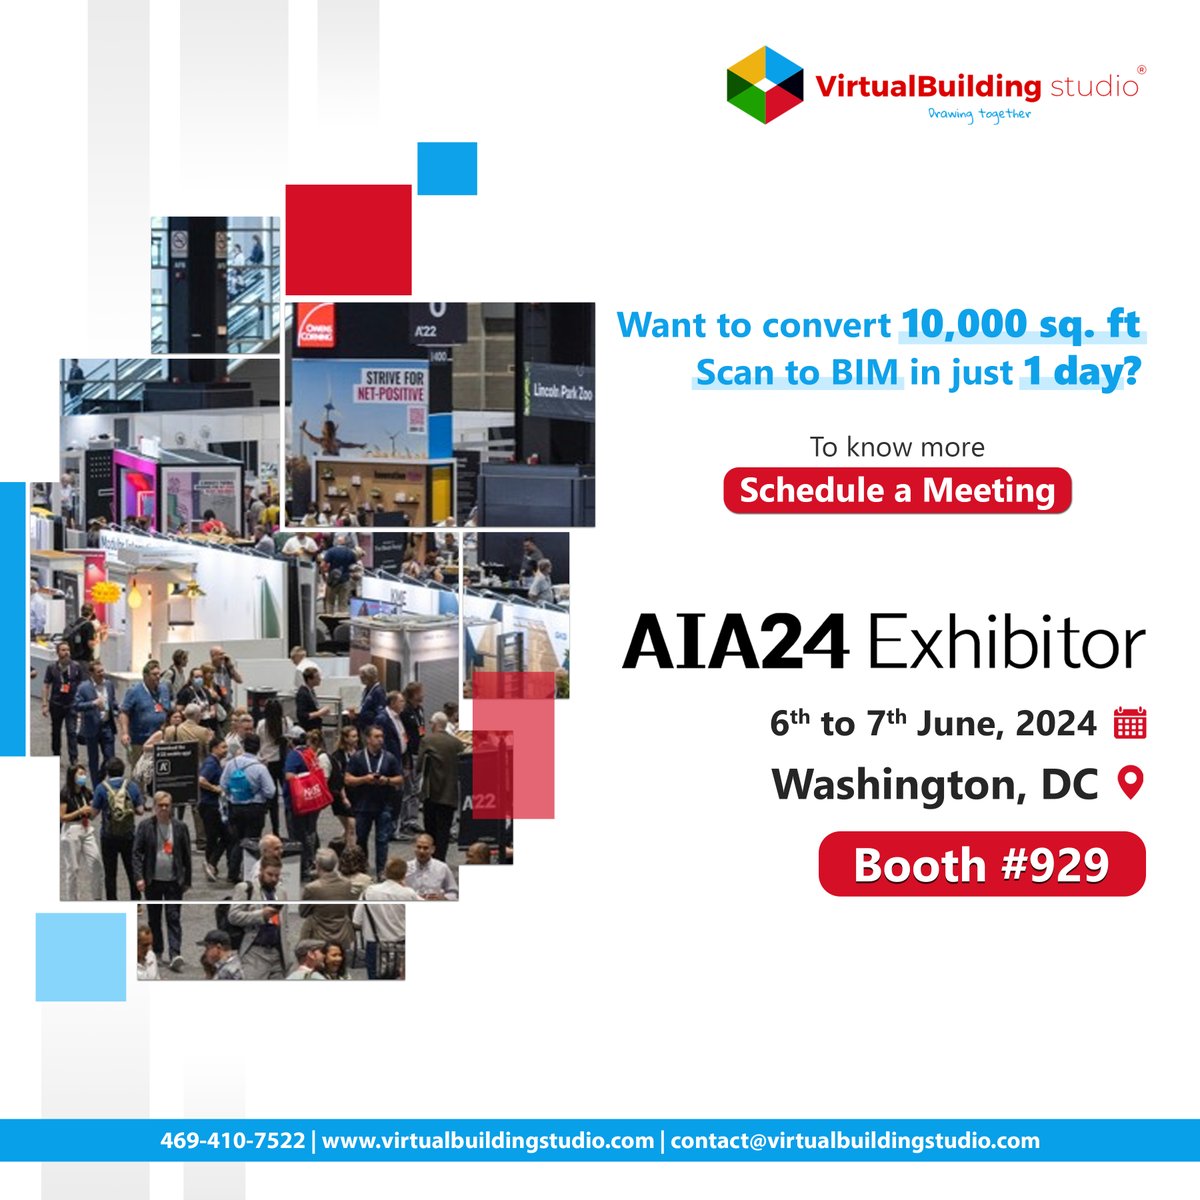 Join us at AIA'24 as we unveil our AI-powered Scan to BIM services, capable of converting 10,000 Sq. Ft in just 1 day!
 
Schedule a Meeting - bit.ly/3Uvju0F
Why should you visit us at AIA'24? - Know more - bit.ly/3wqdhLA

#AIA #AIAExpo #AIA2024 #USA